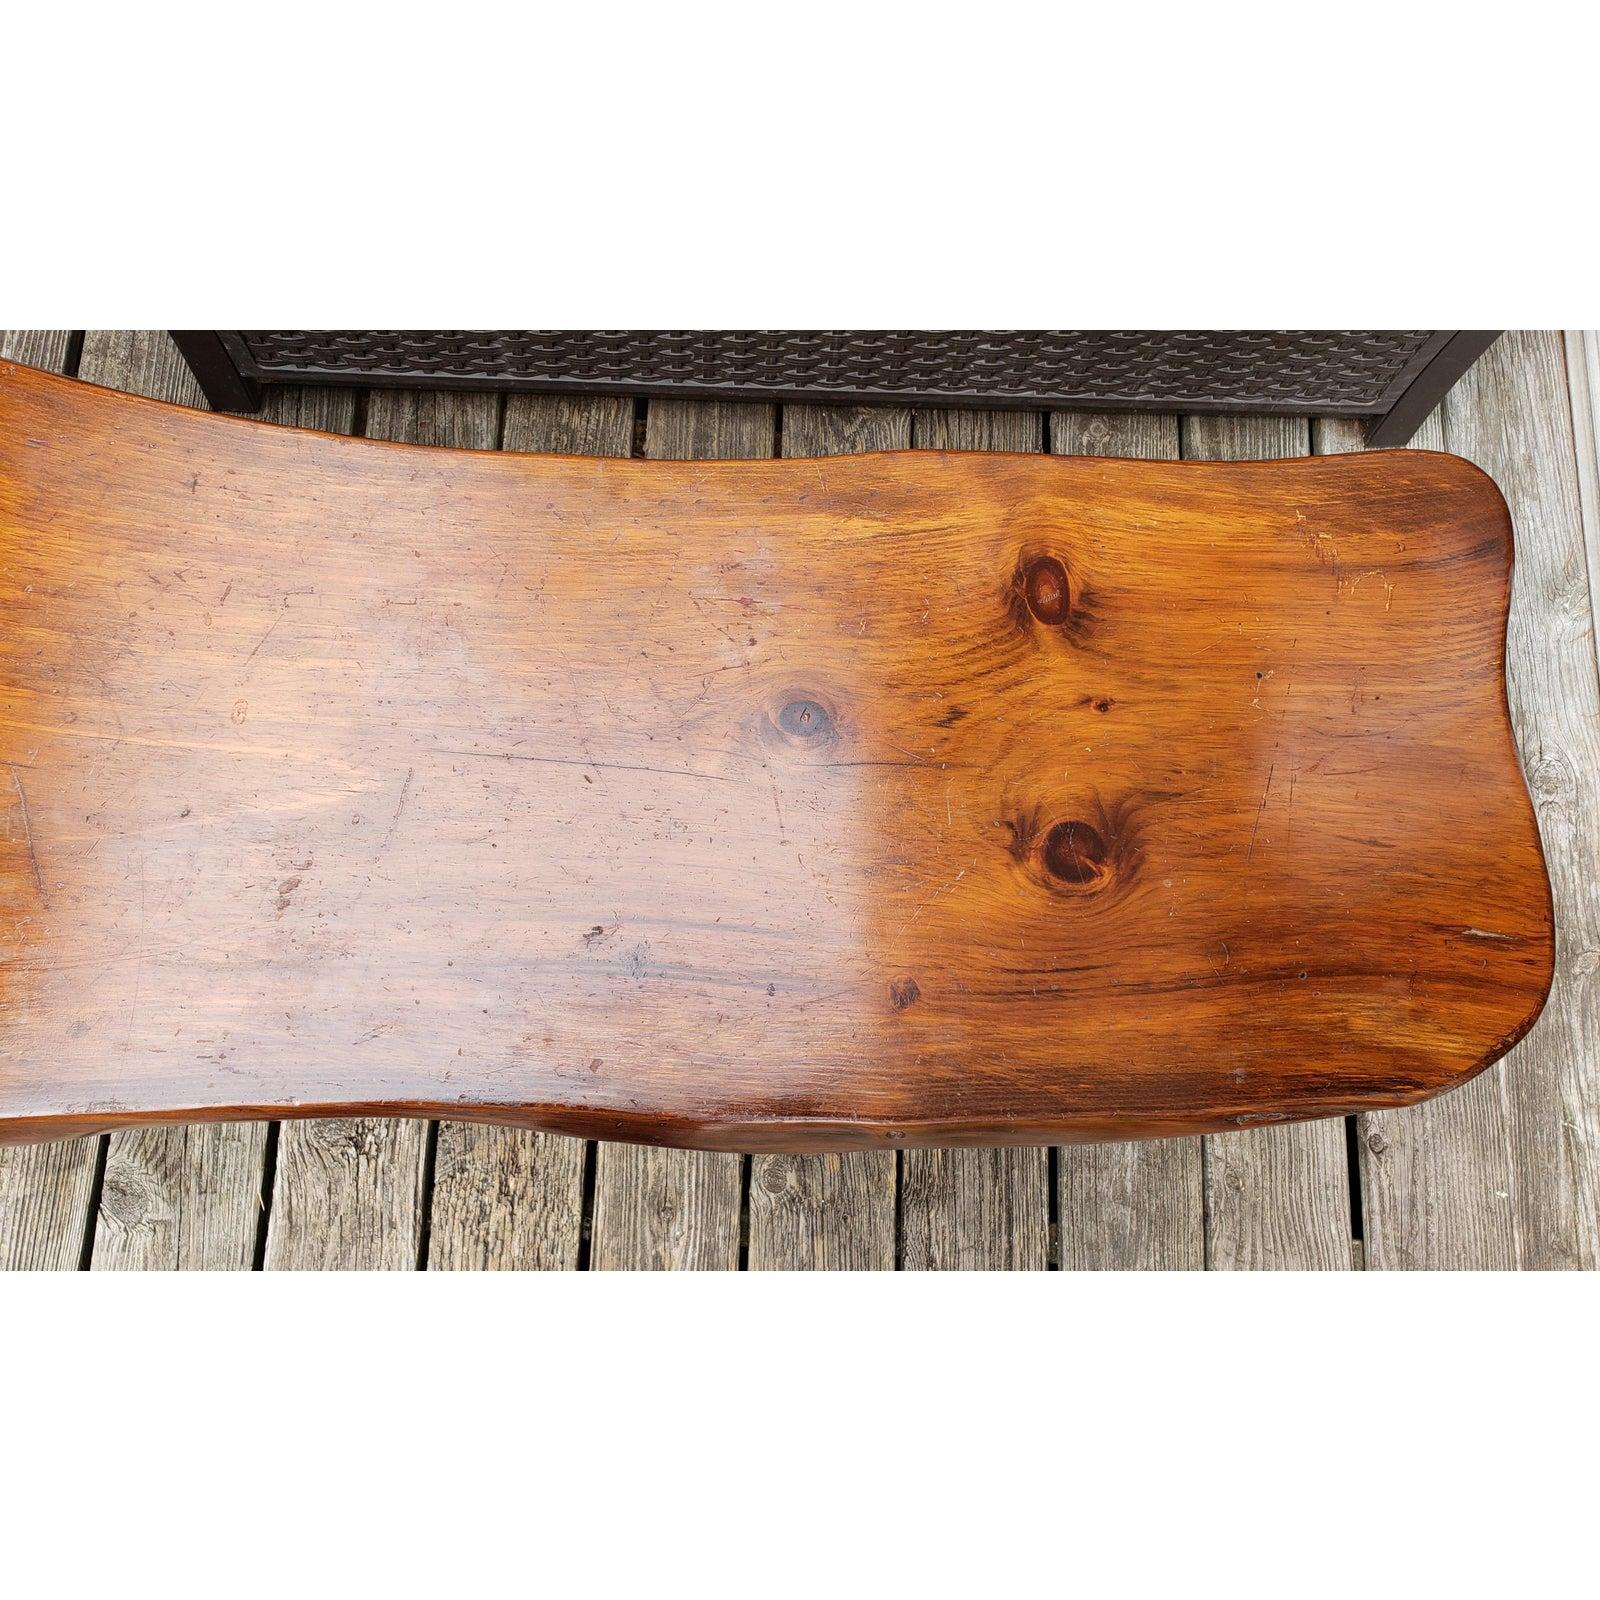 1980s Handcrafted Polished Walnut Pine Wood Slabs Trestle Coffee Table In Good Condition For Sale In Germantown, MD